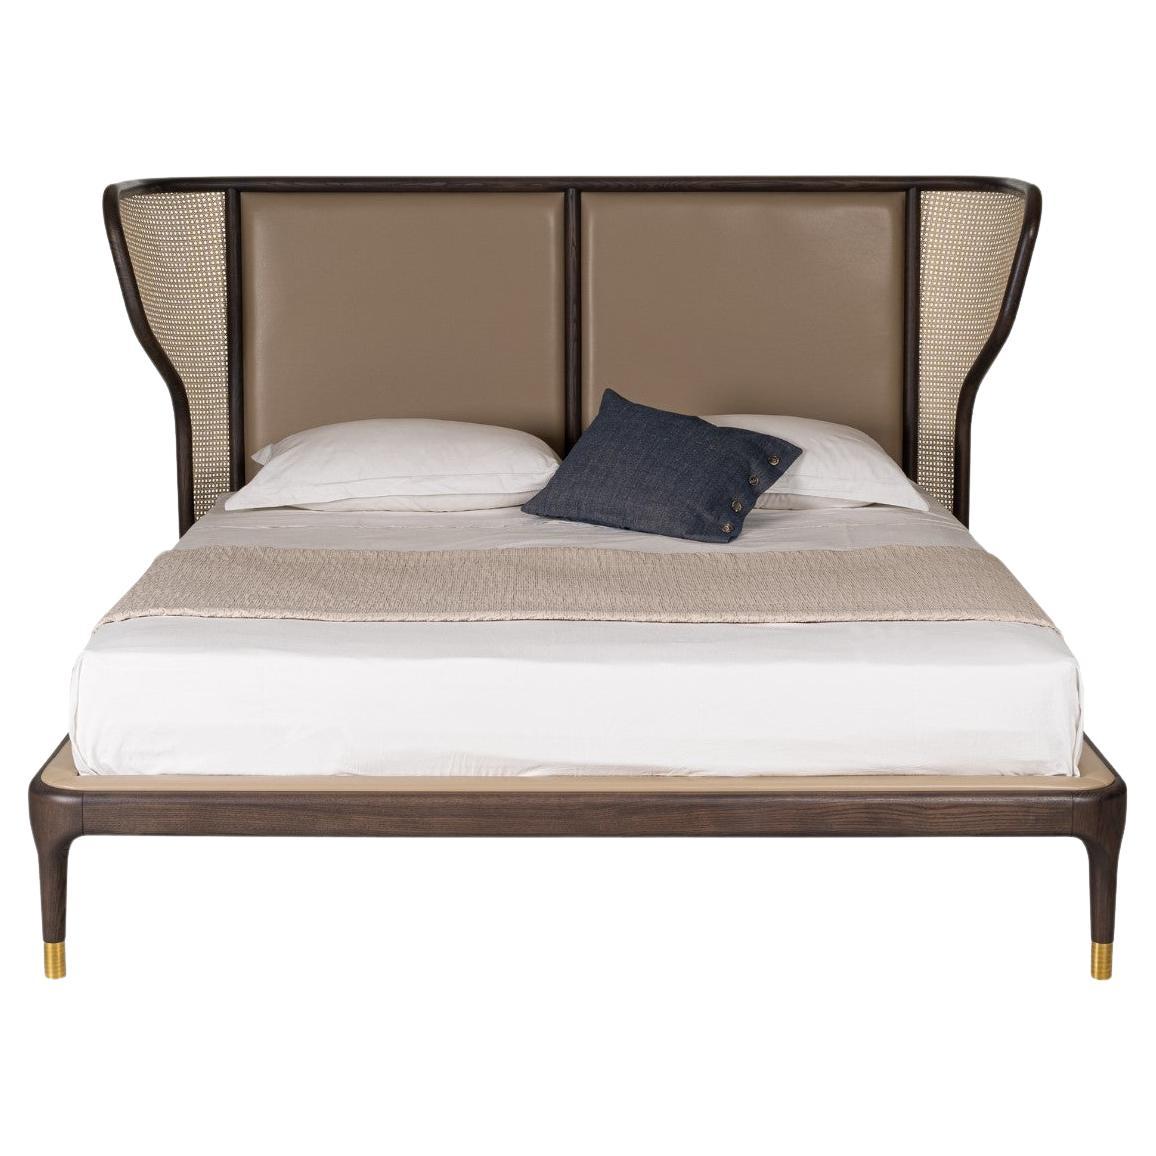 Joyce bed by Morelato, solid Ash wood and Straw, Upholstered Headboard